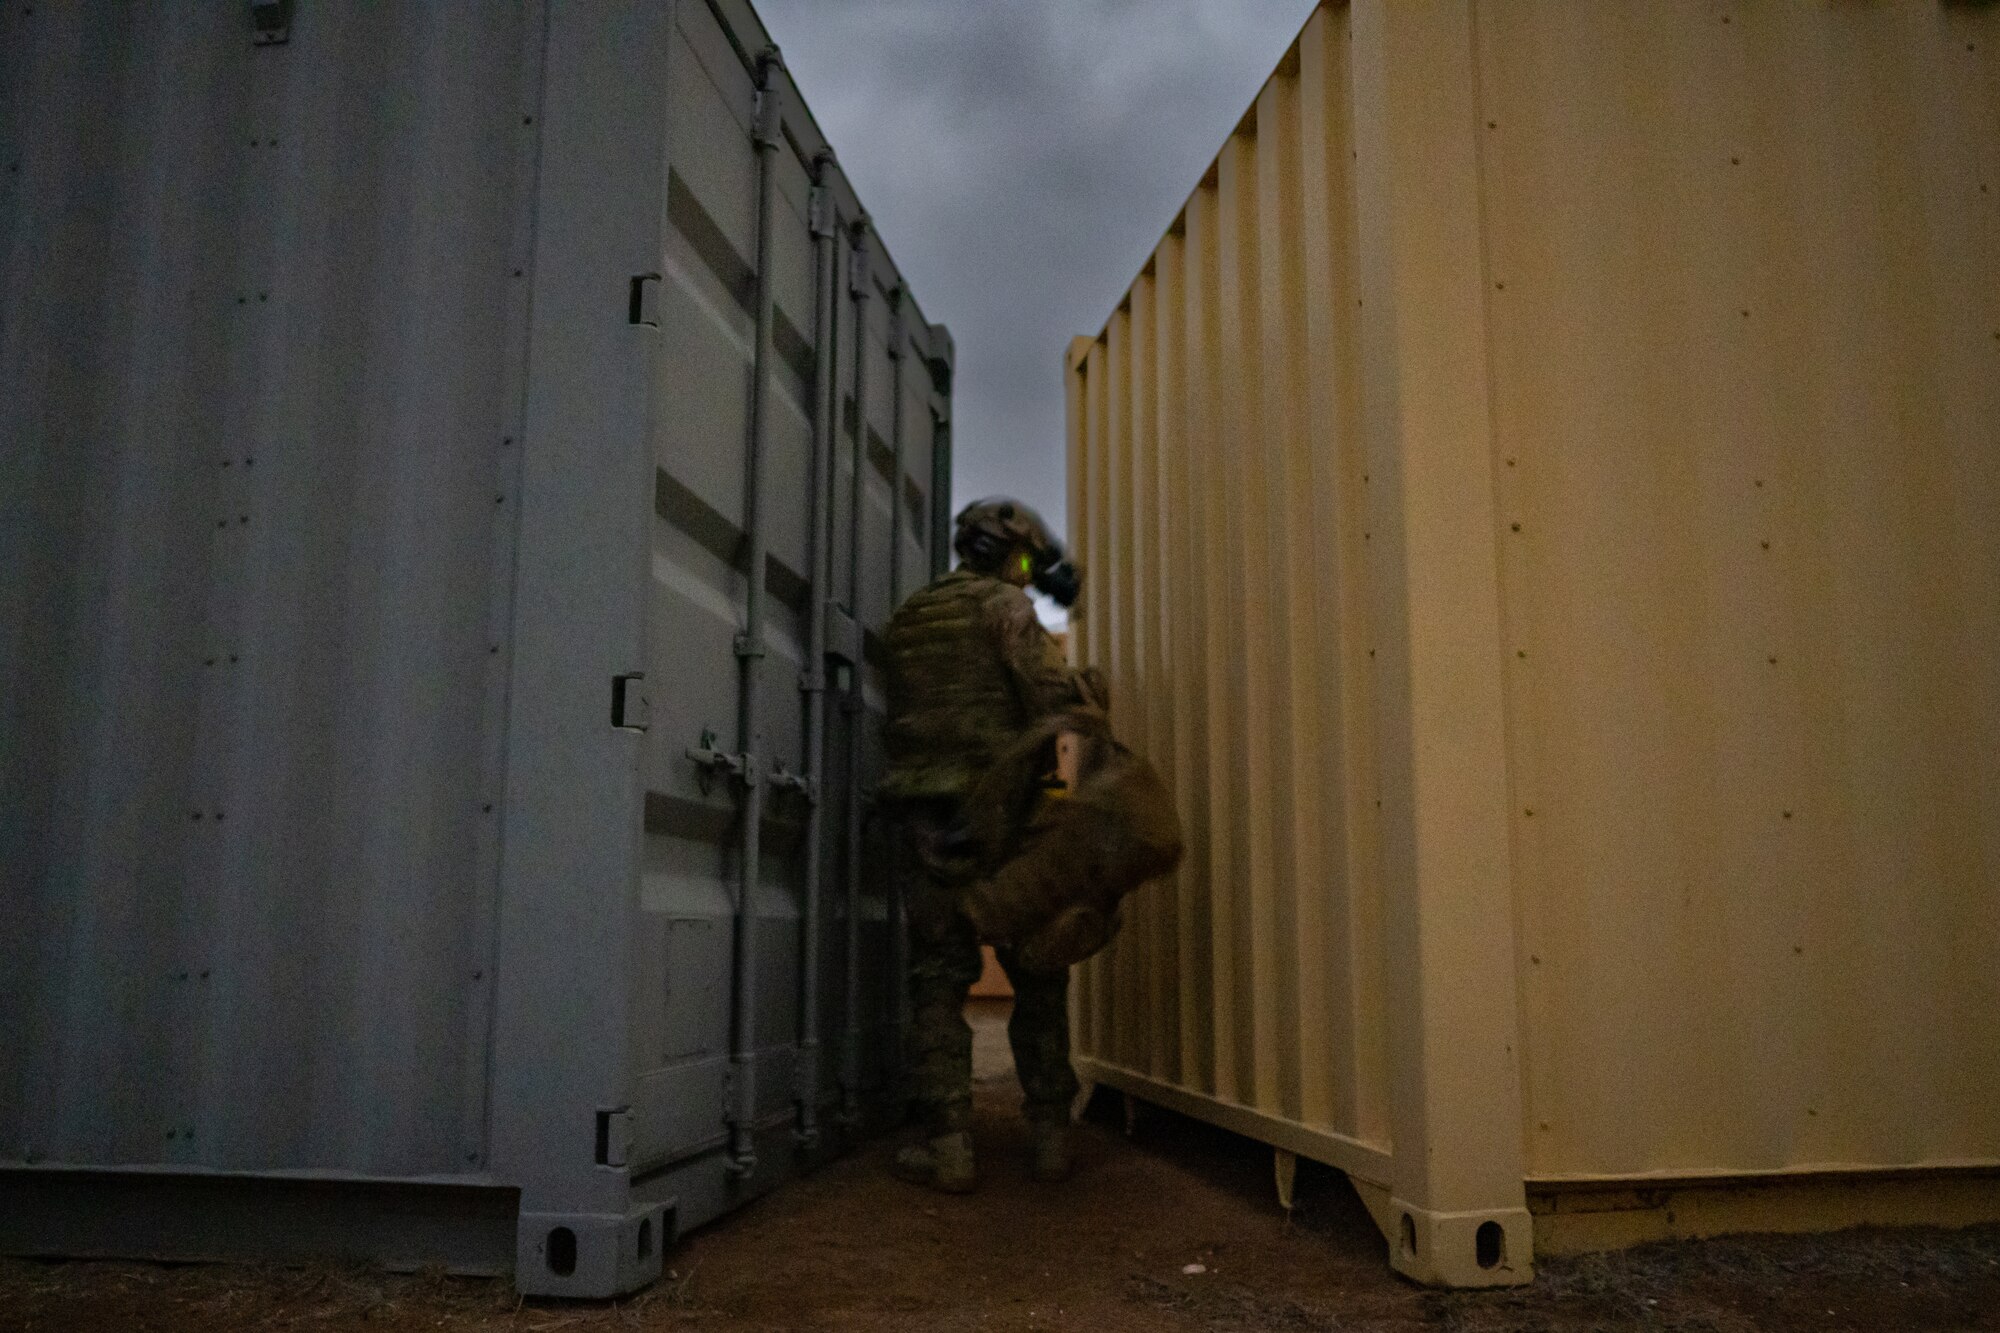 A man in military uniform and equipment removes his backpack in between two shipping containers with a narrow gap between them.